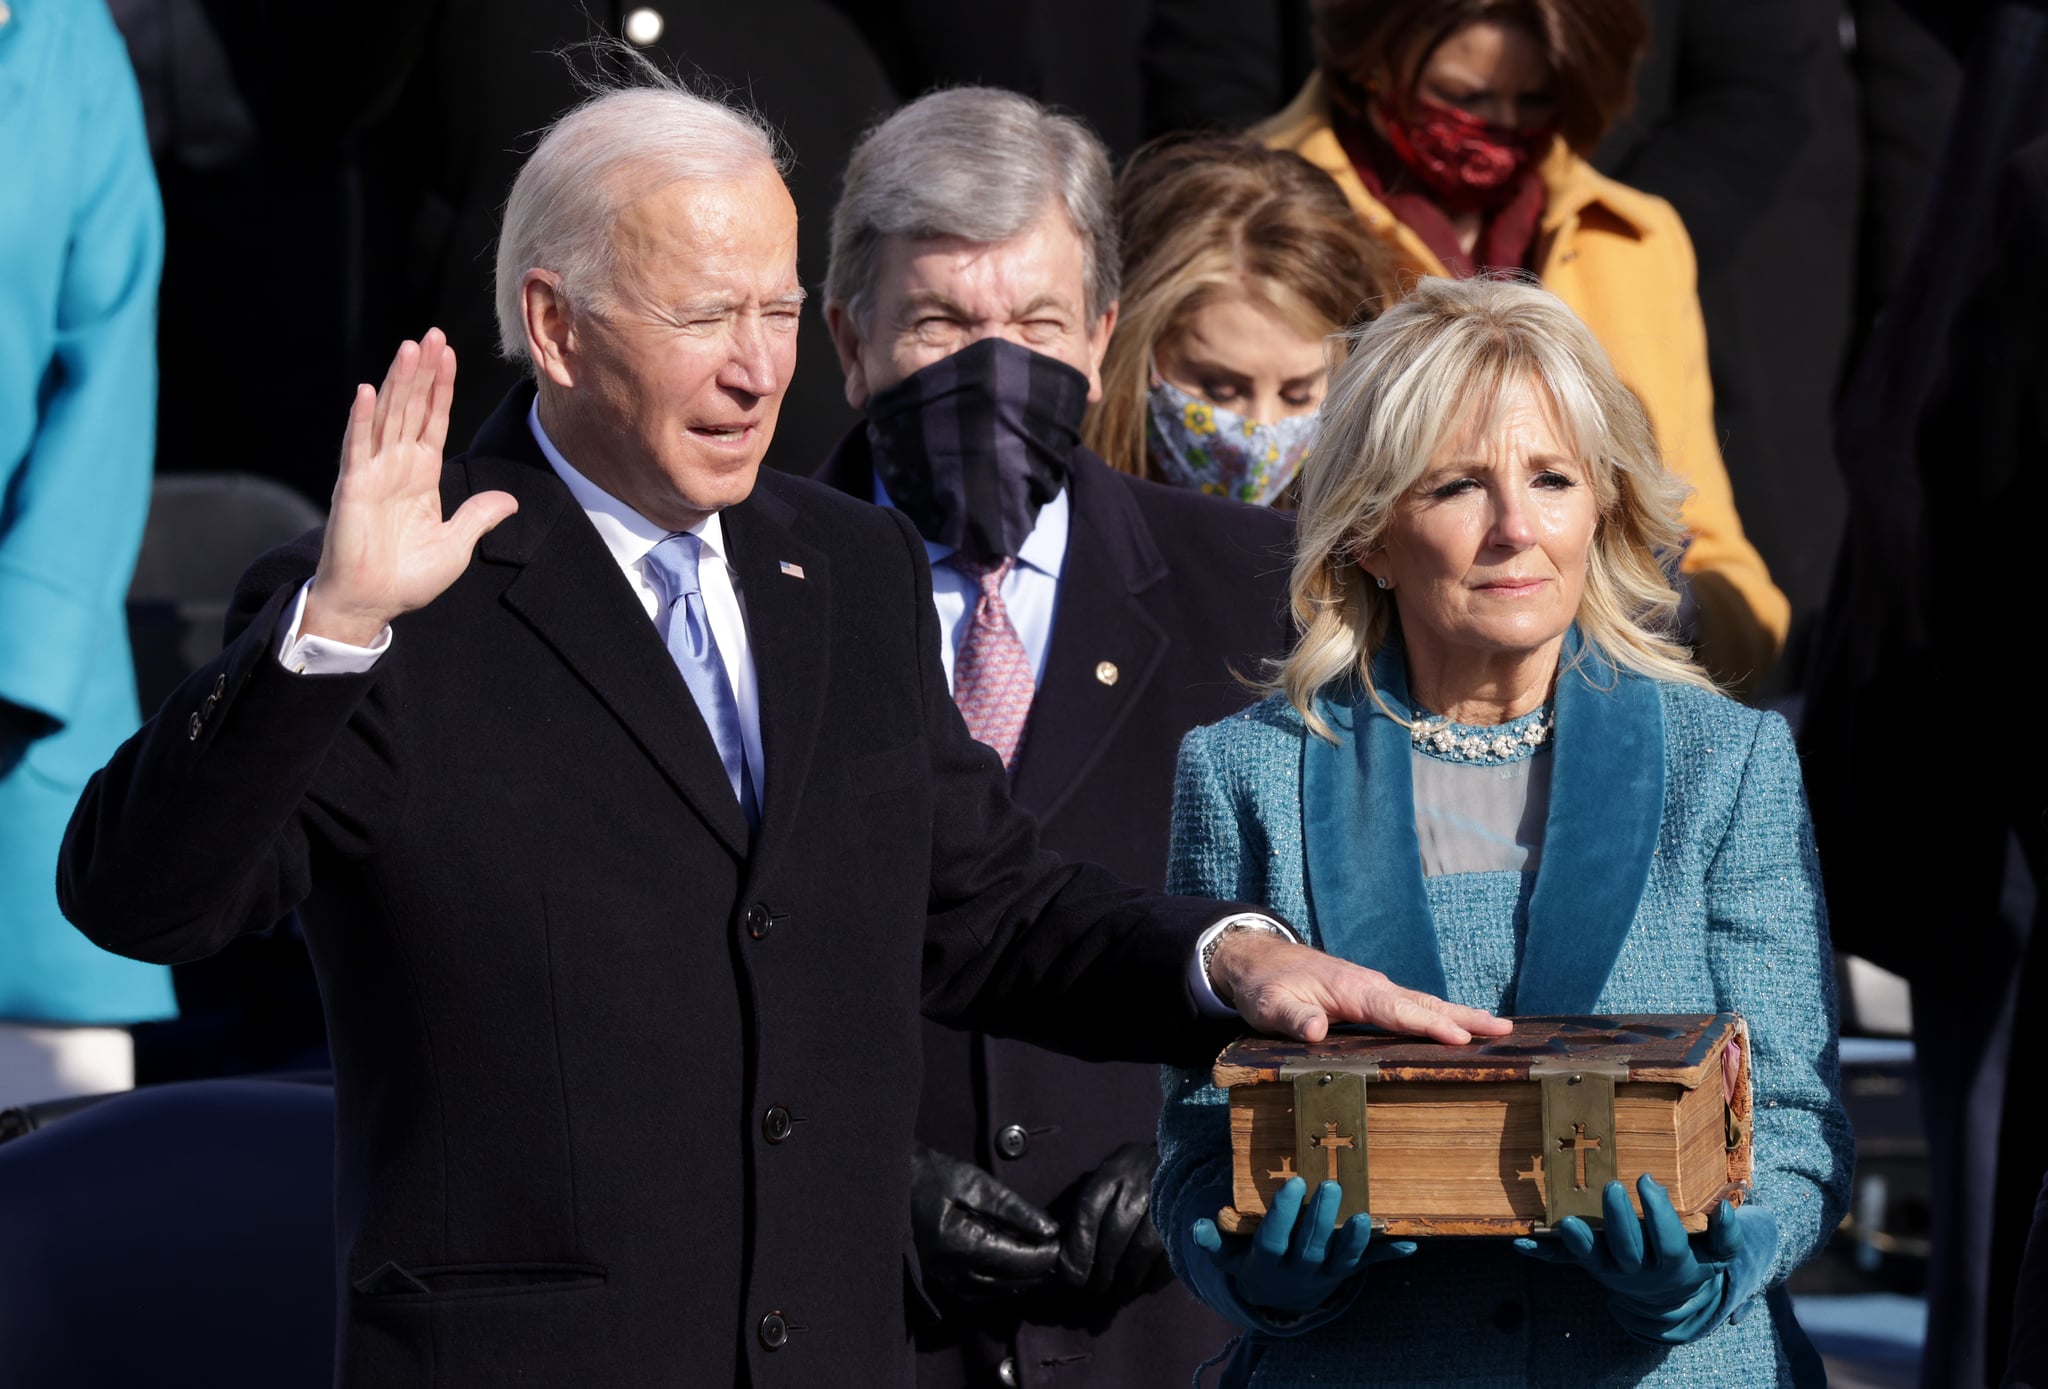 WASHINGTON, DC - JANUARY 20: Joe Biden is sworn in as U.S. President as his wife Dr. Jill Biden looks on during his inauguration on the West Front of the U.S. Capitol on January 20, 2021 in Washington, DC.  During today's inauguration ceremony Joe Biden becomes the 46th president of the United States. (Photo by Alex Wong/Getty Images)